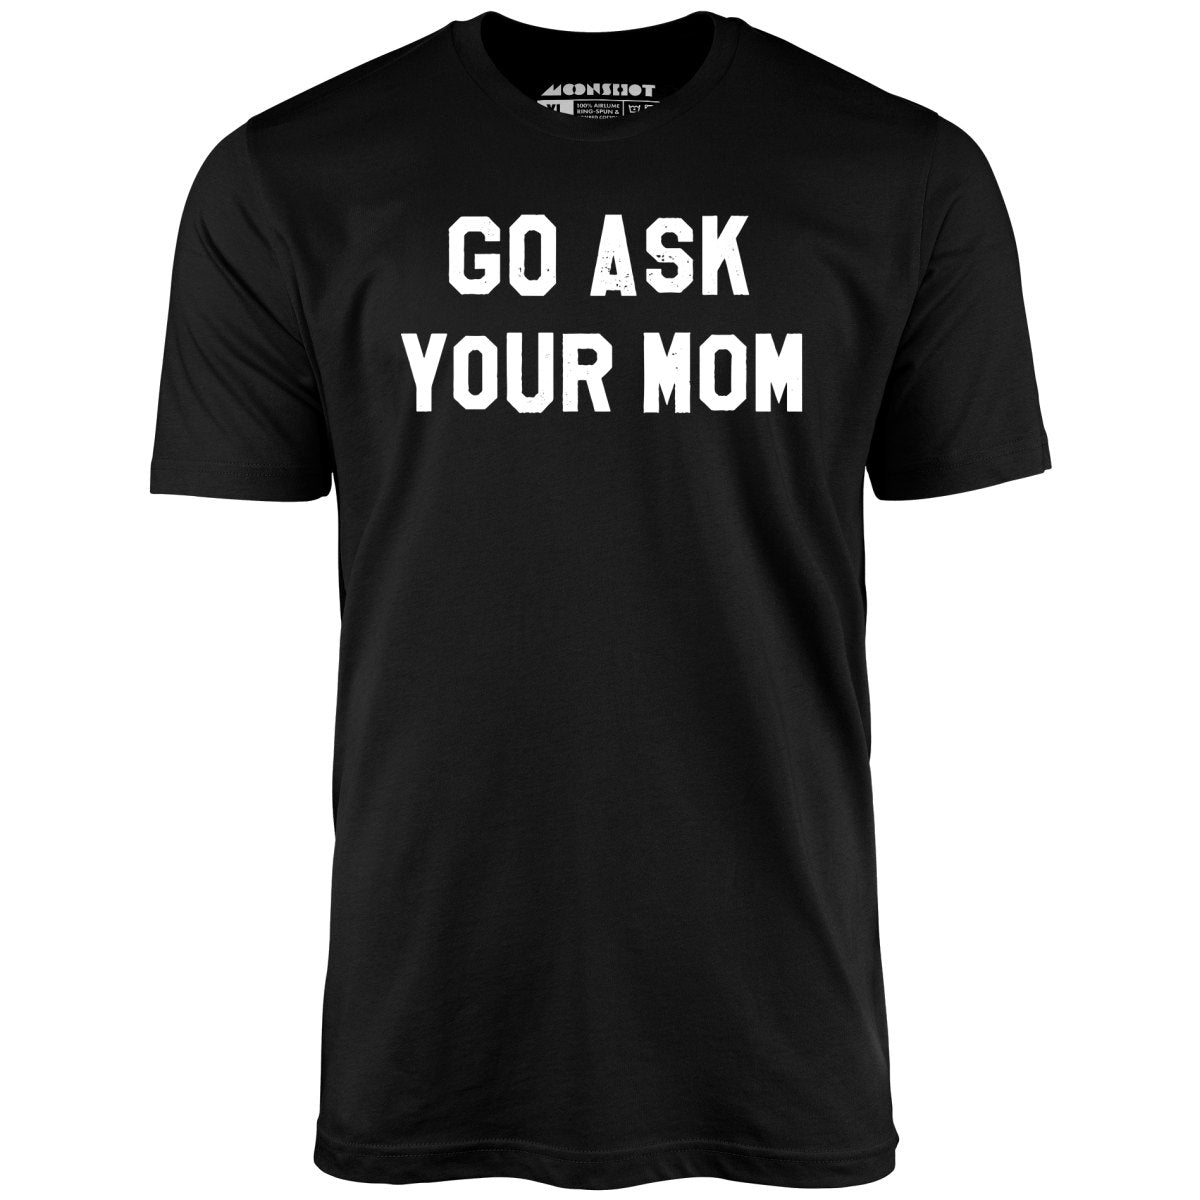 Go Ask Your Mom - Unisex T-Shirt